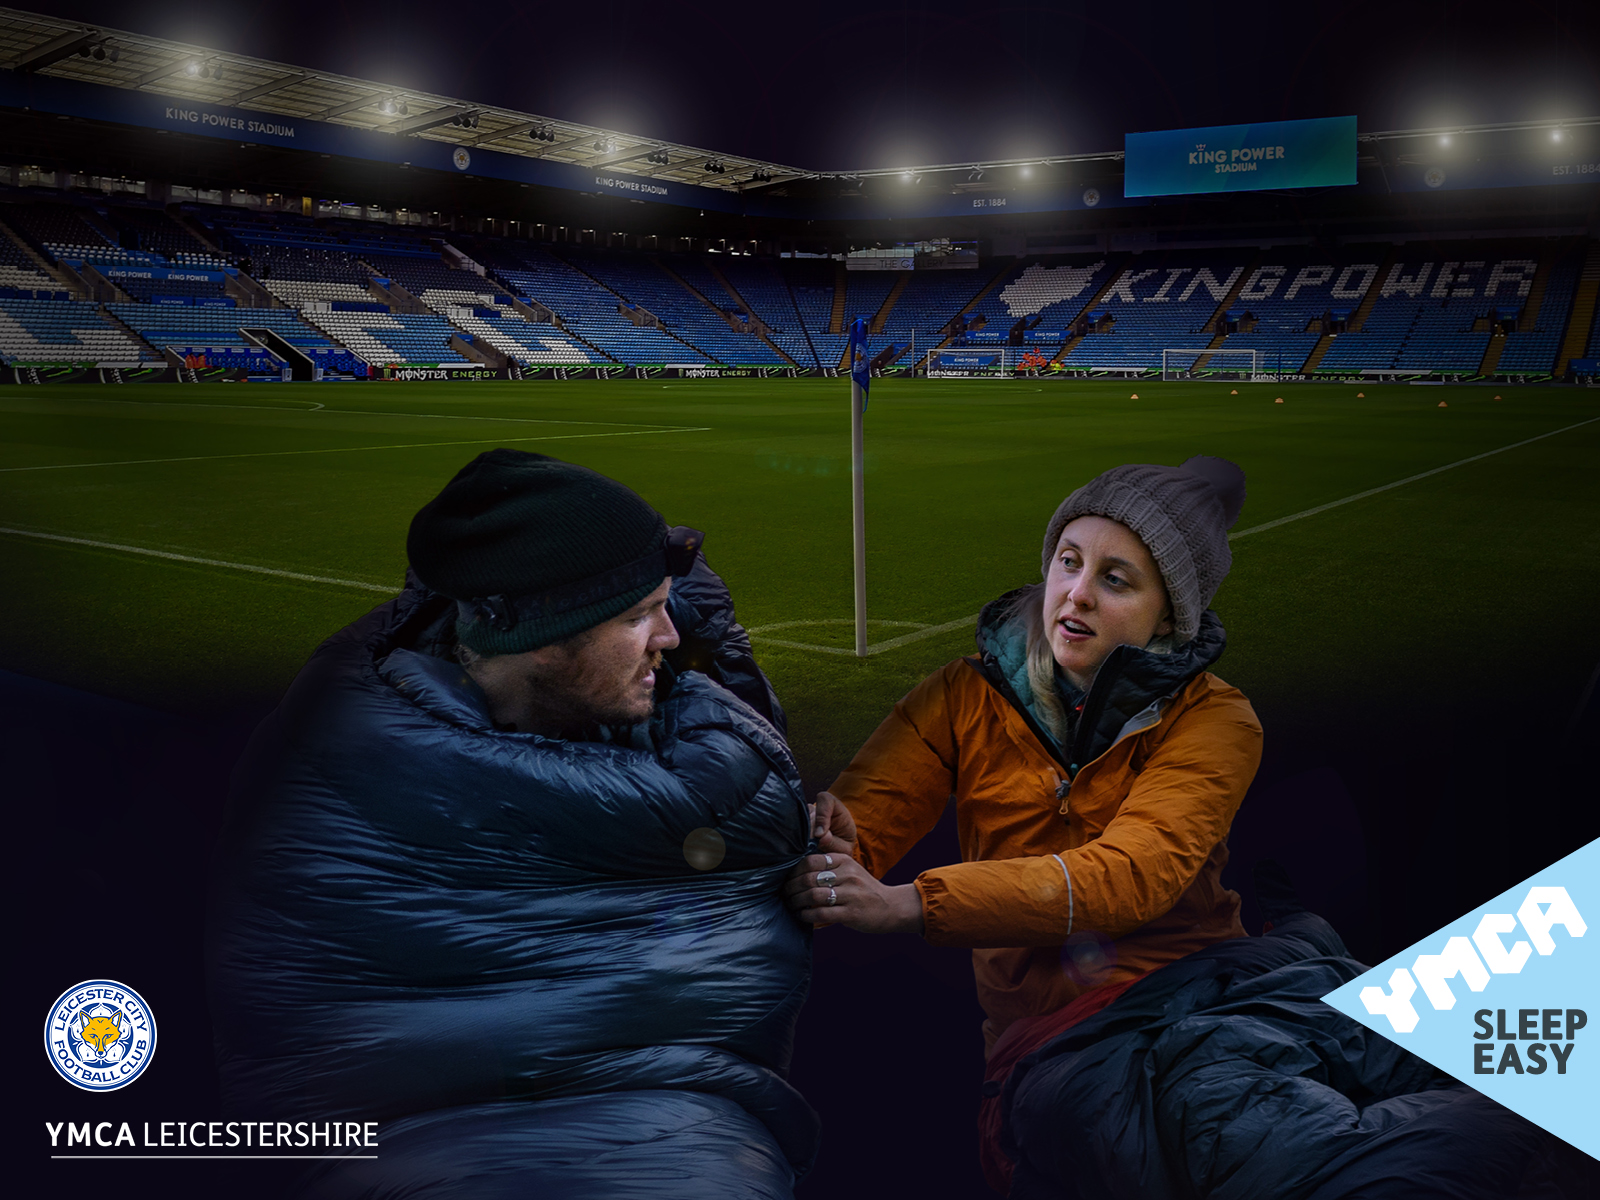 Sleep out at King Power Stadium in May